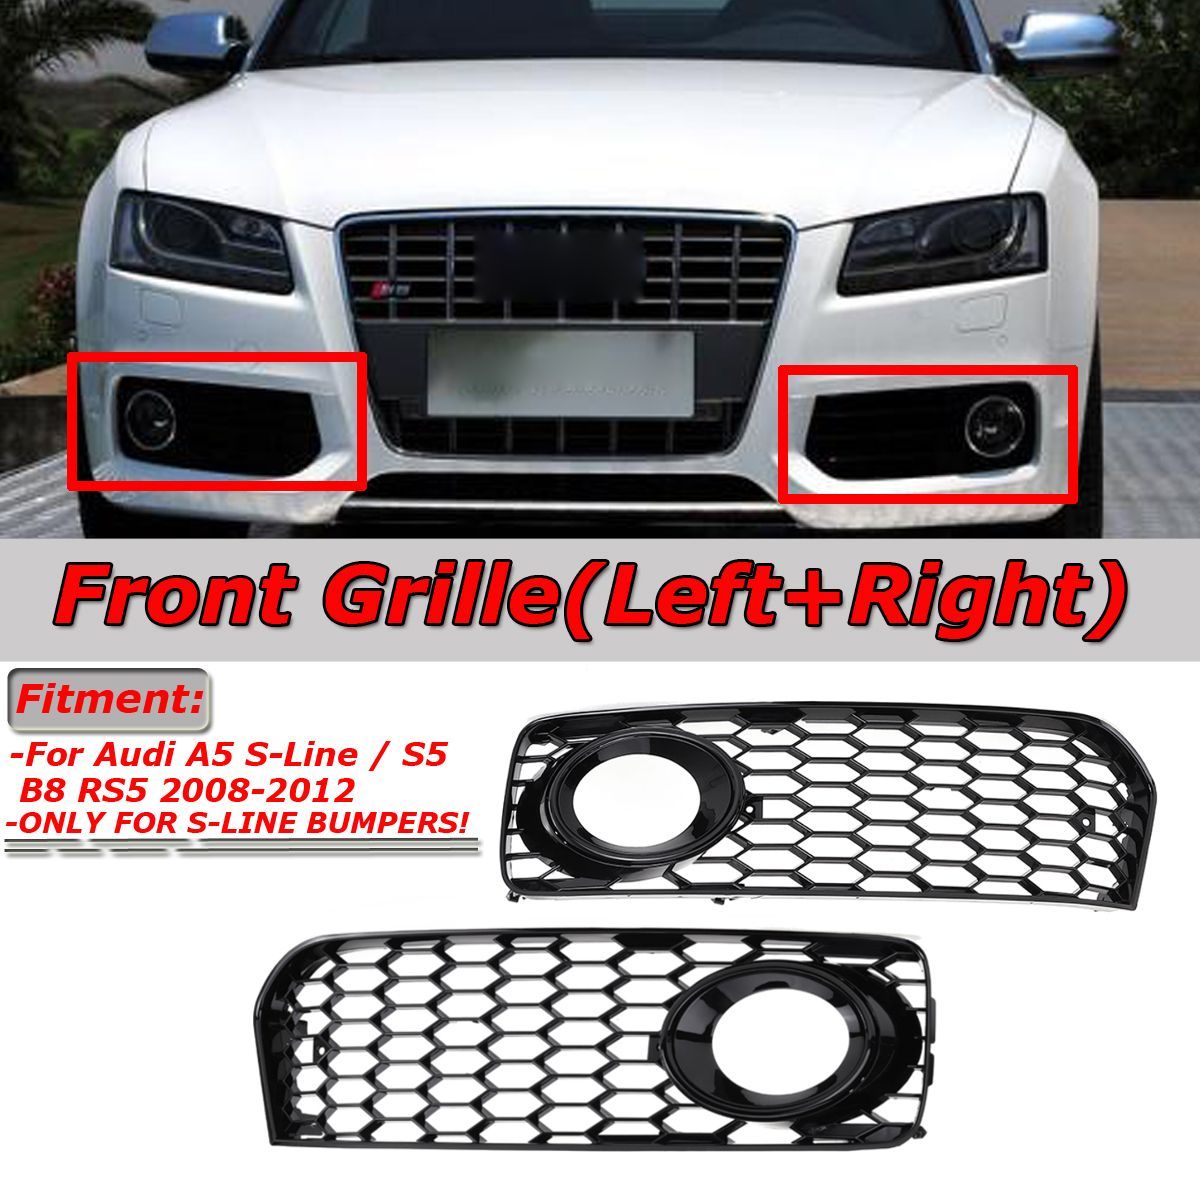 Front-Fog-Light-Lamp-Cover-Grille-Grill-Honeycomb-Hex-Black-For-Audi-A5-S-Line-S5-B8-RS5-2008-2012-1695684